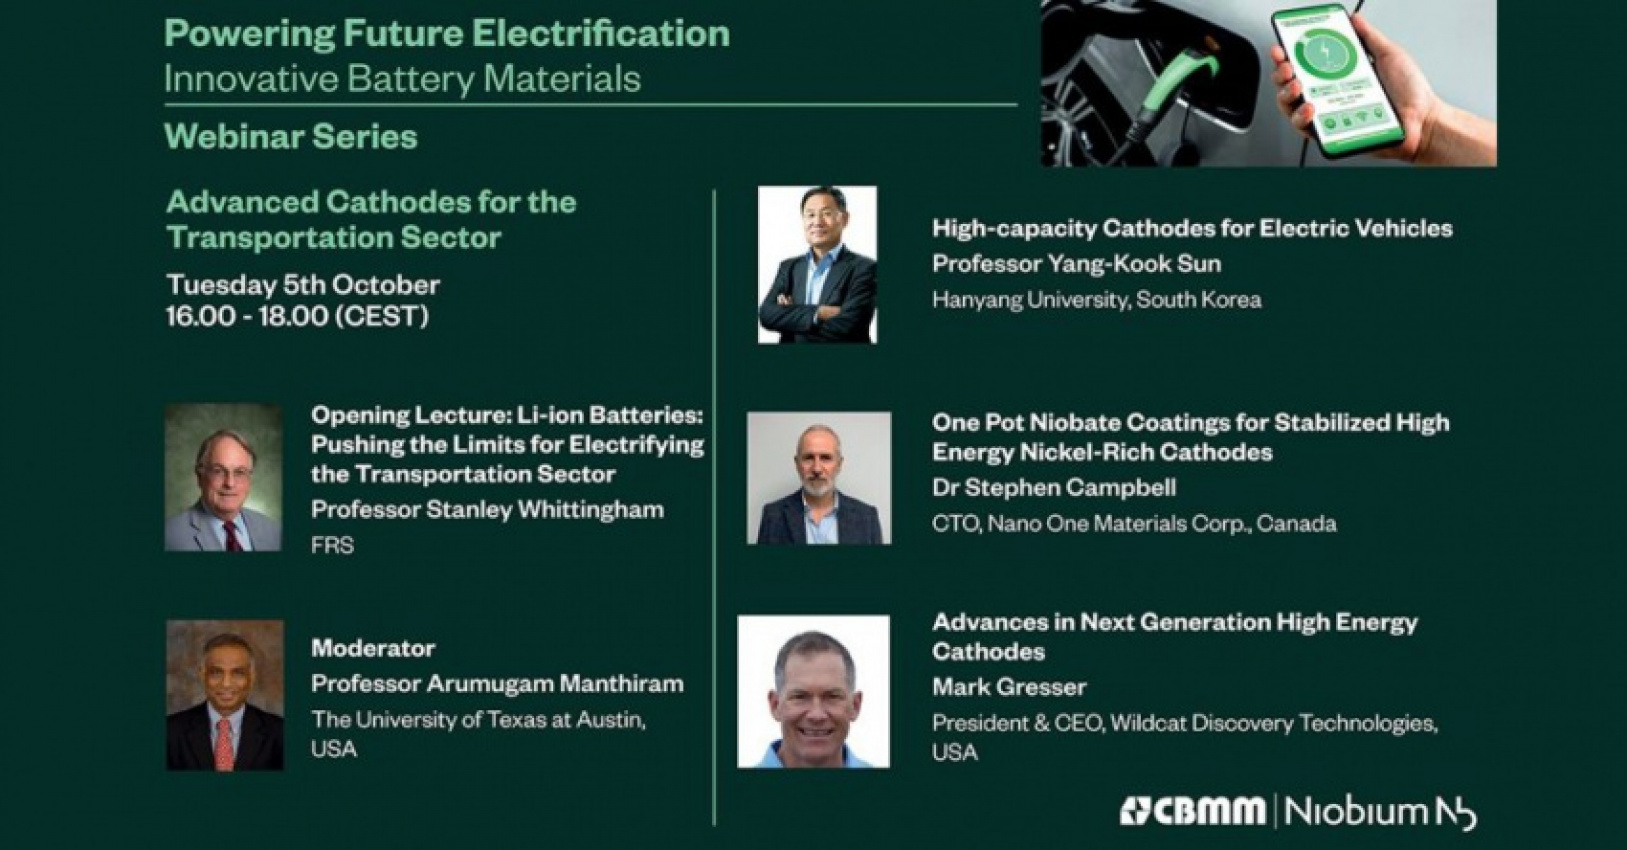 autos, cars, energy solutions, technology, cbmm niobium, nano one materials corporation, professor stanley whittingham, wildcat discovery technologies, how niobium makes batteries greener, cheaper and cleaner – with insights from a nobel prize winner & experts